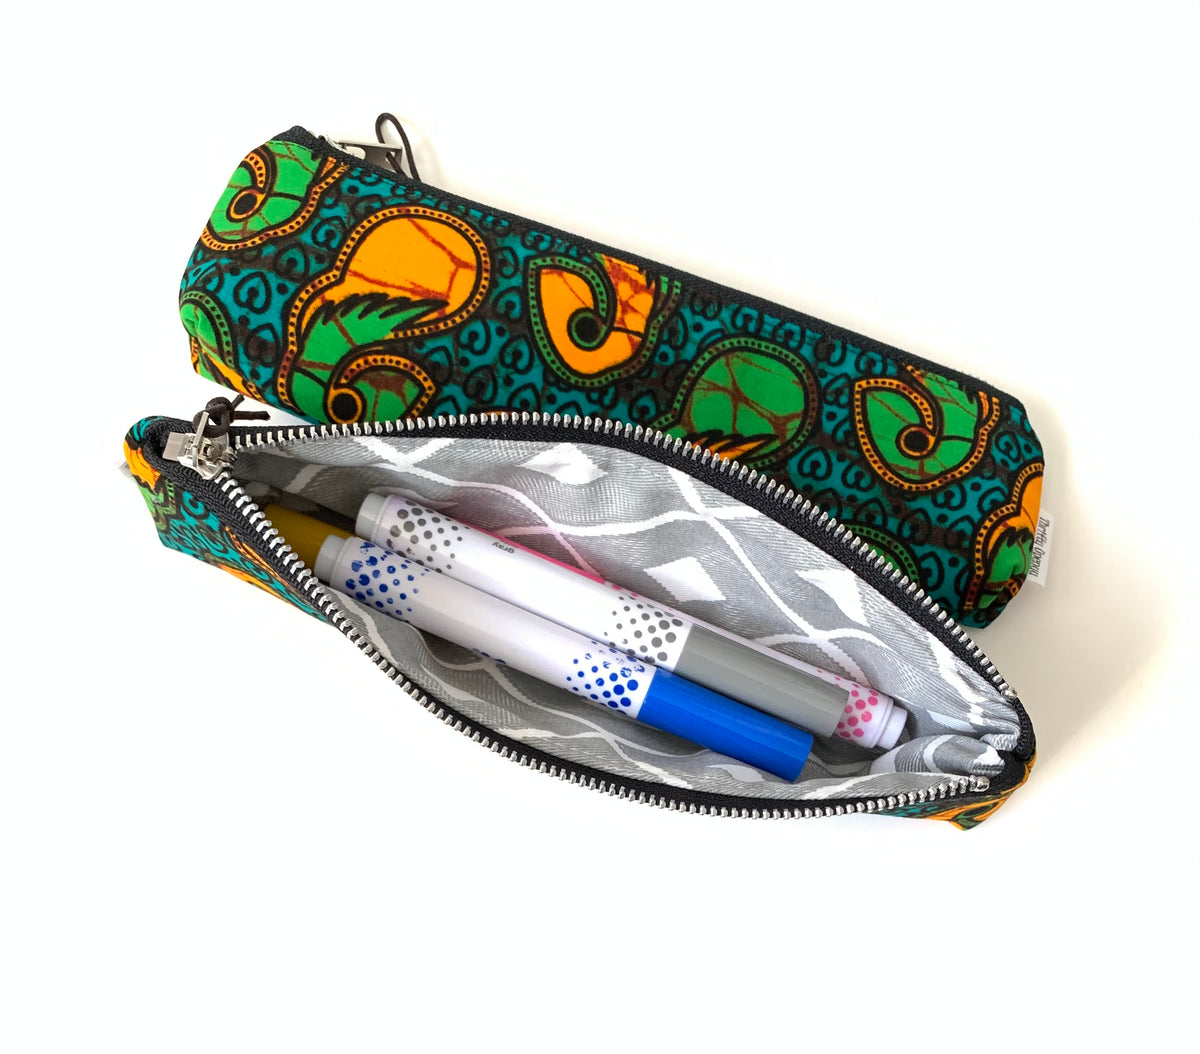 Recycled Non - Woven Fabric Pencil Pouch – avacayam